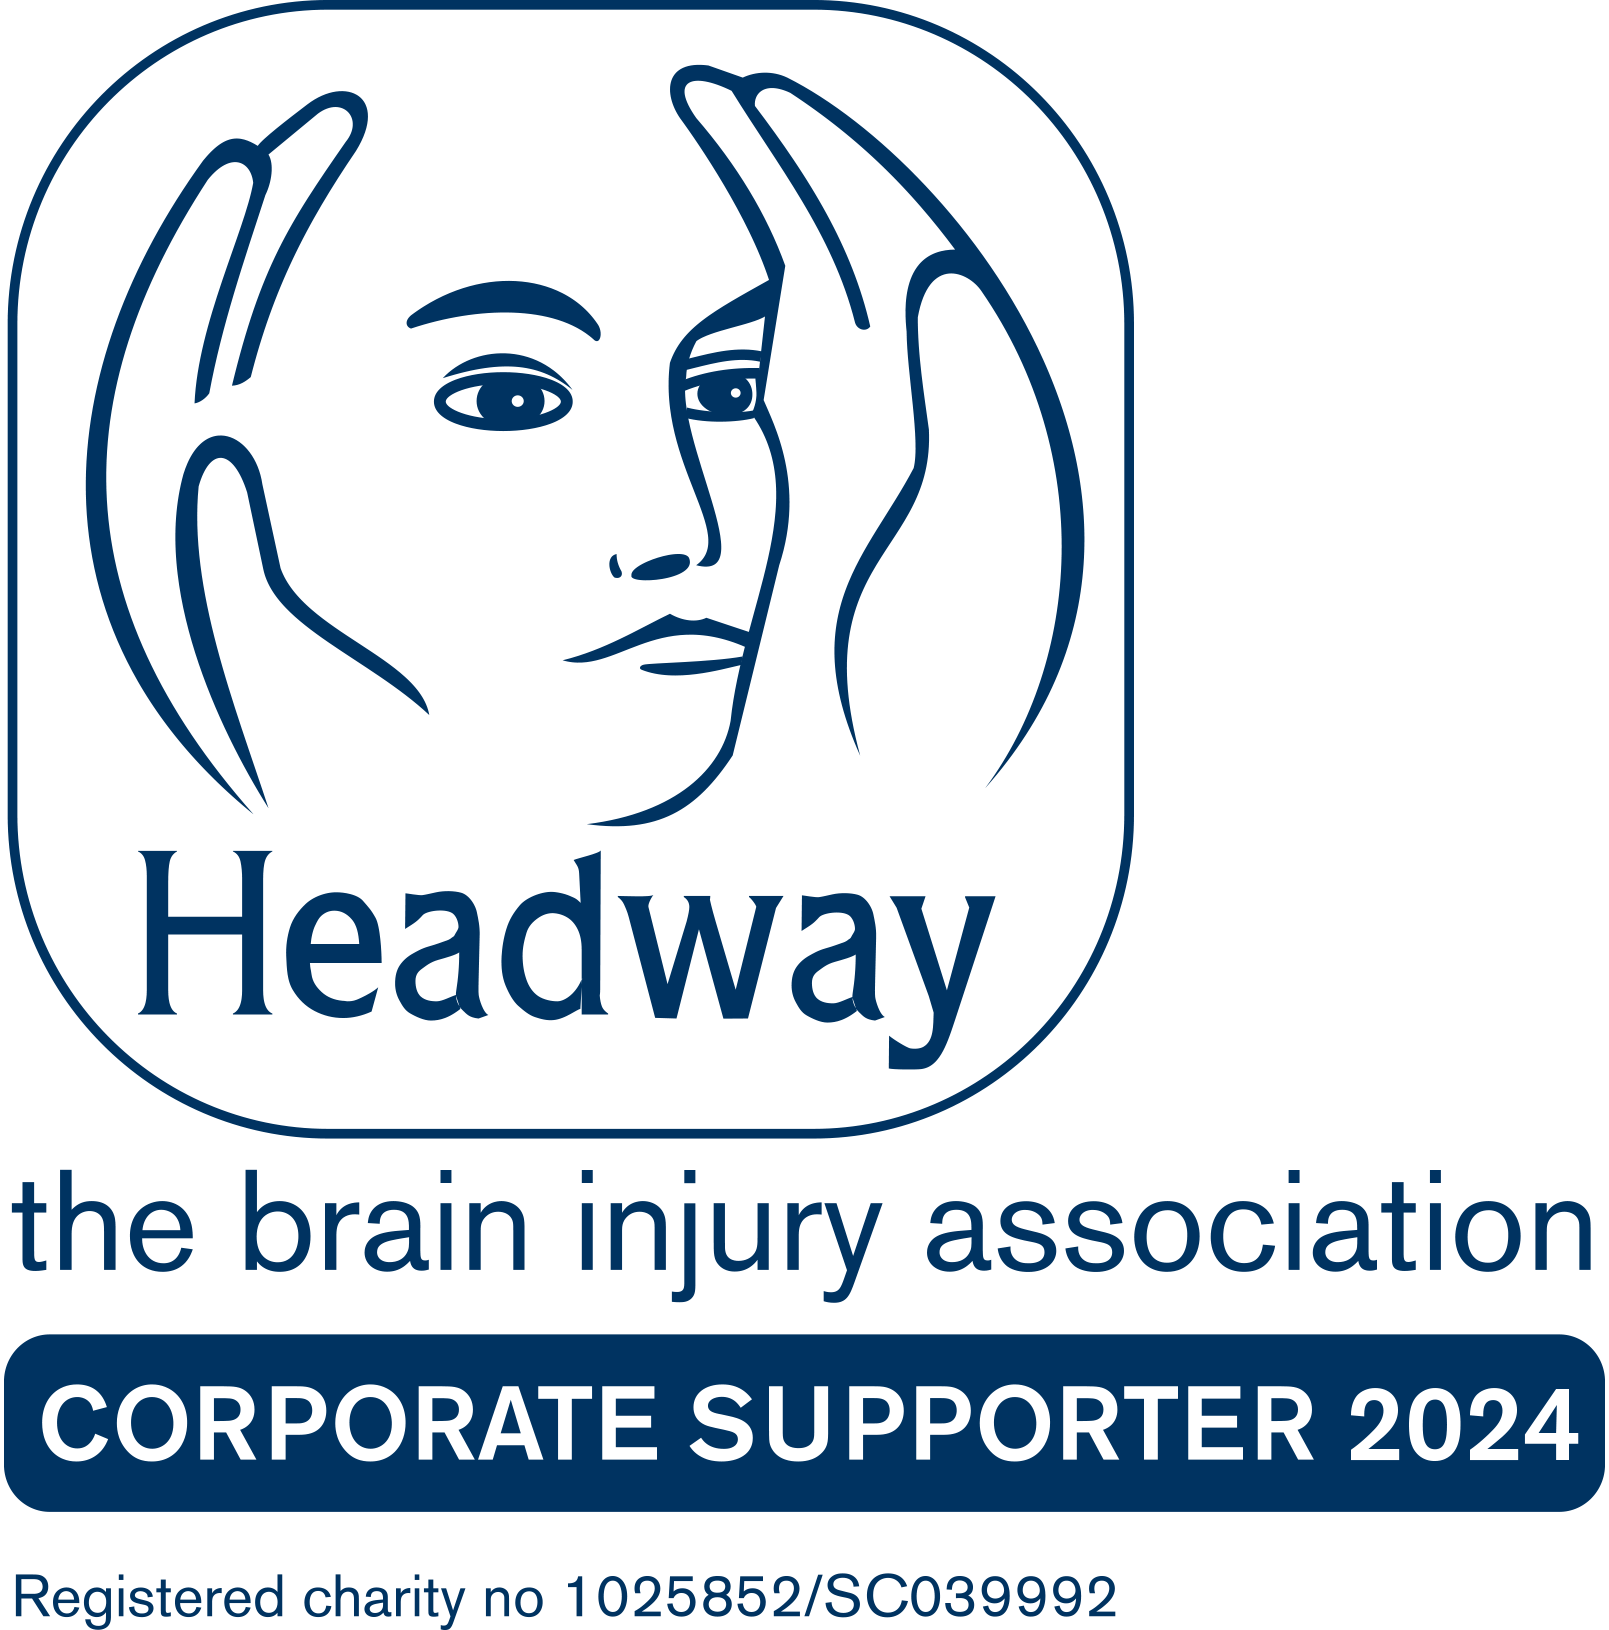 Headway Corporate Supporter 2024